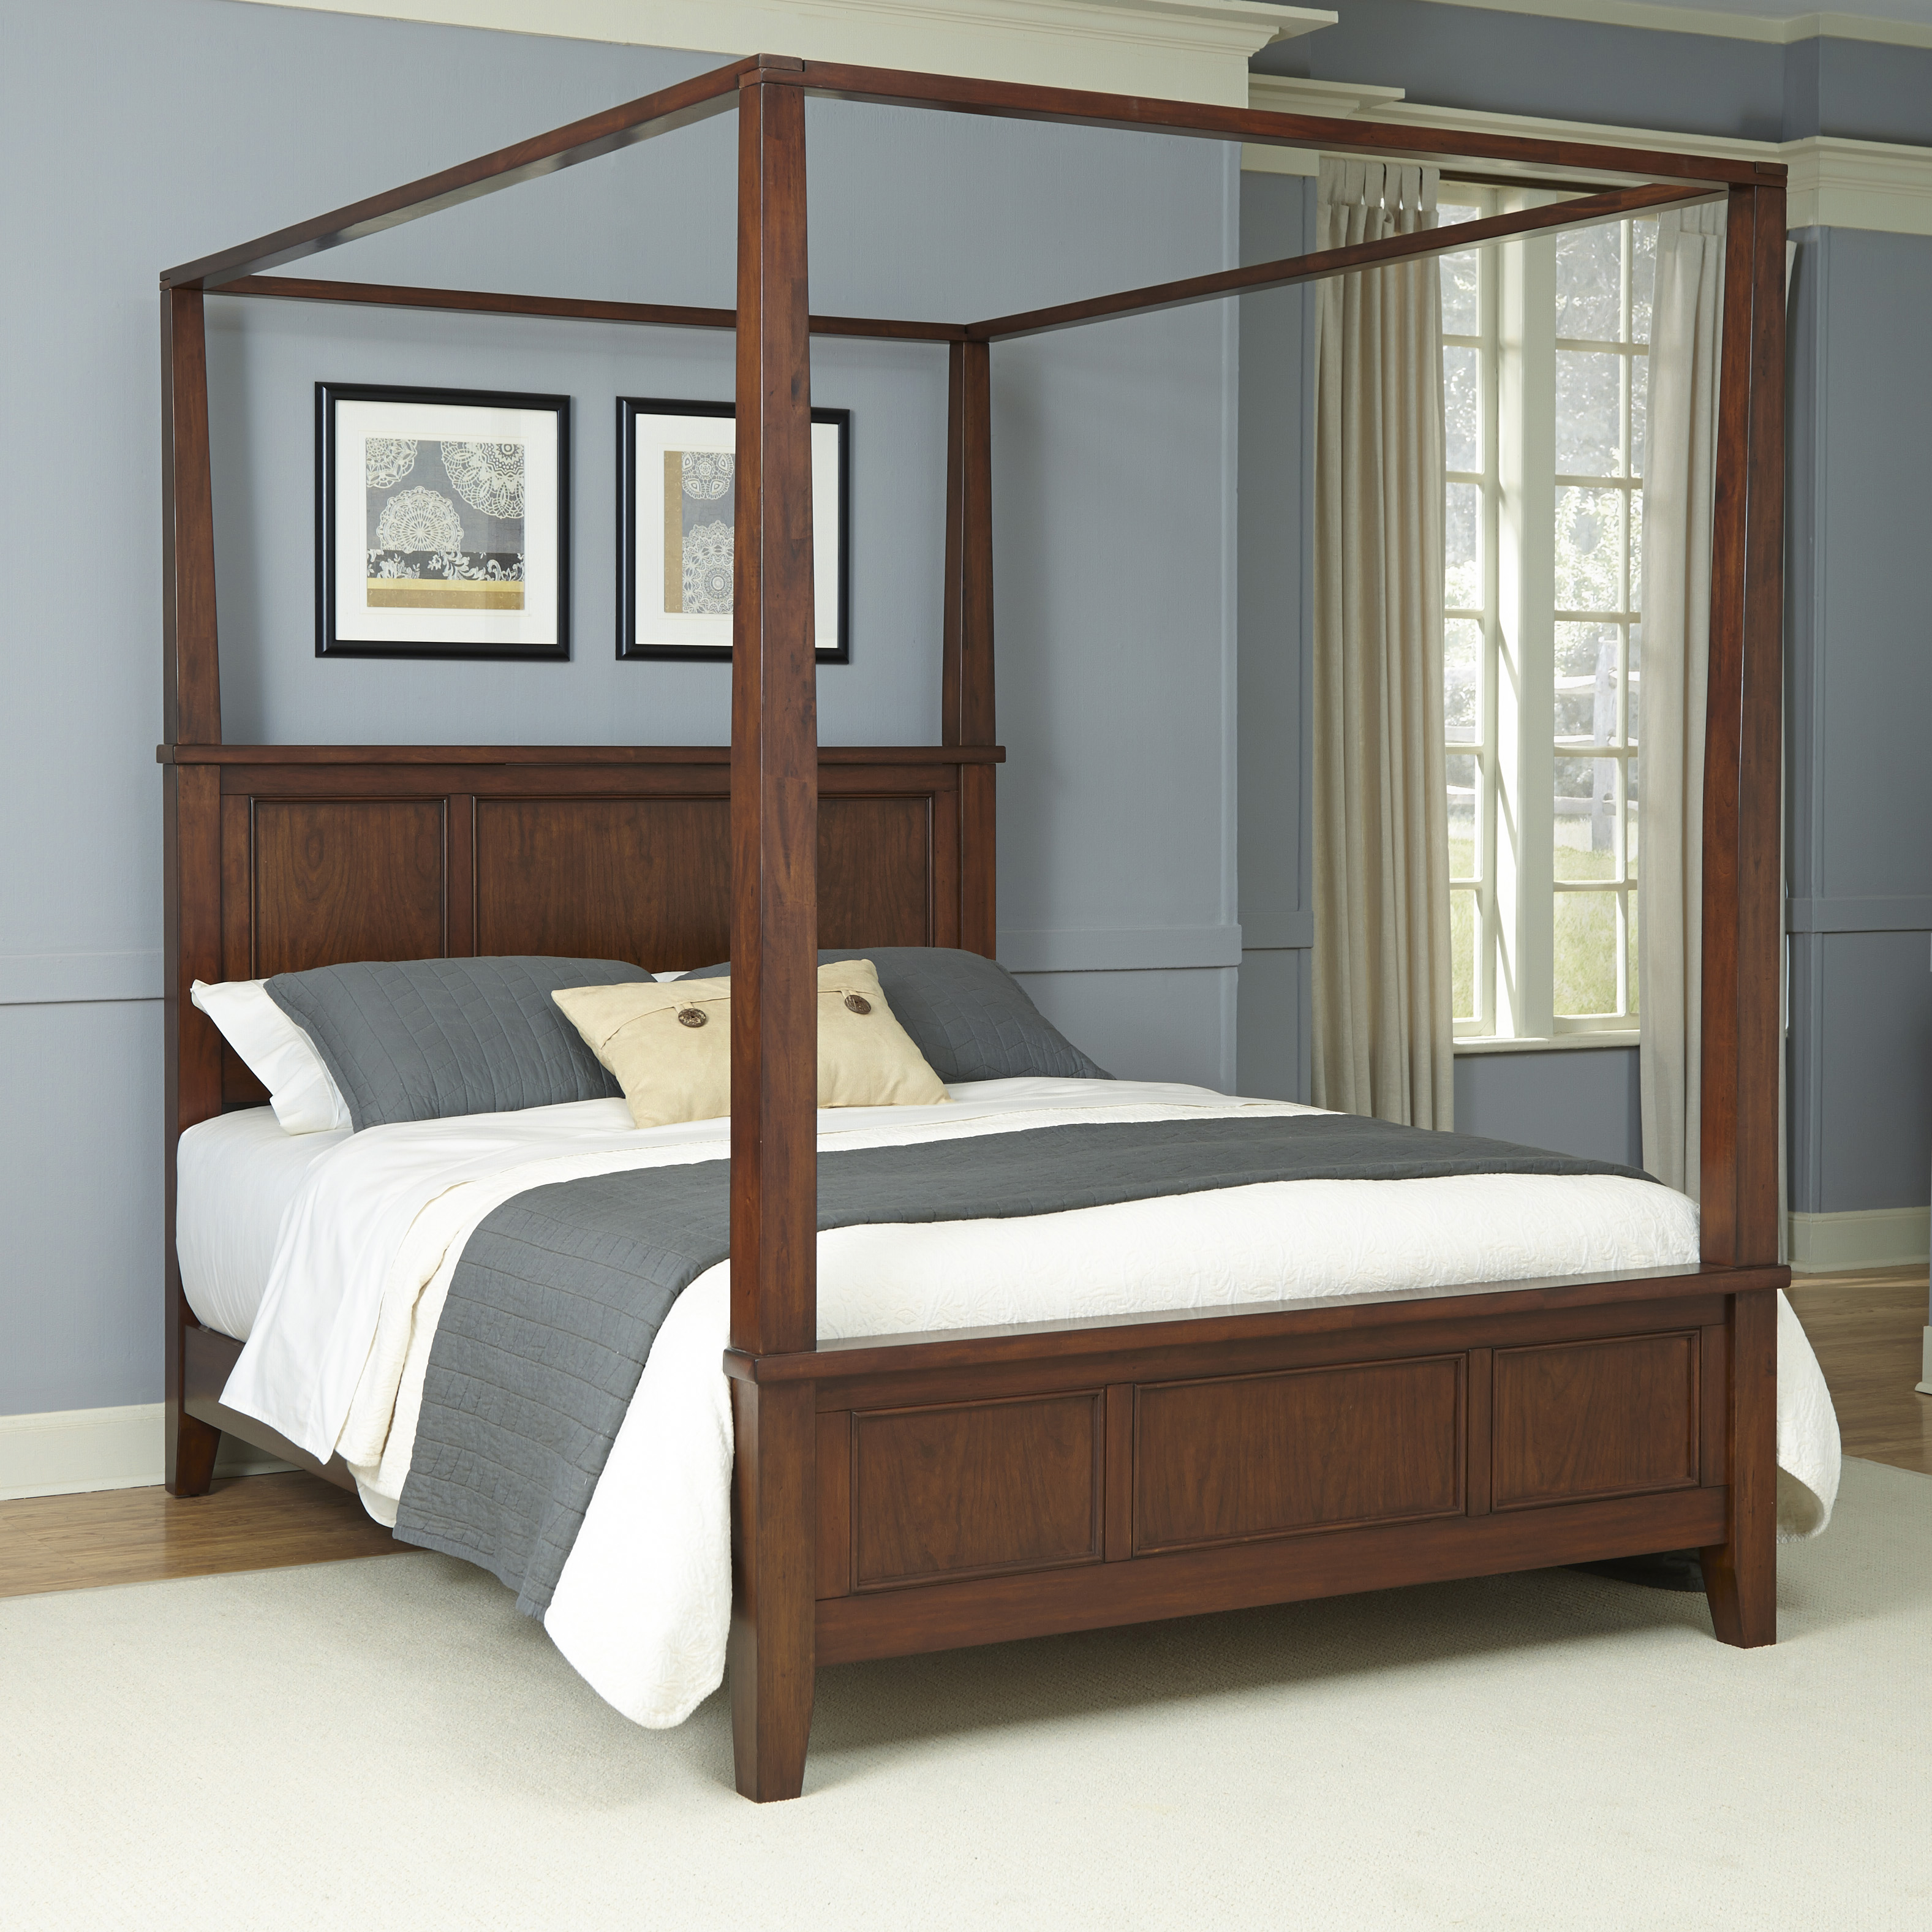 Home Styles Chesapeake King Canopy Bed   Home   Furniture   Bedroom